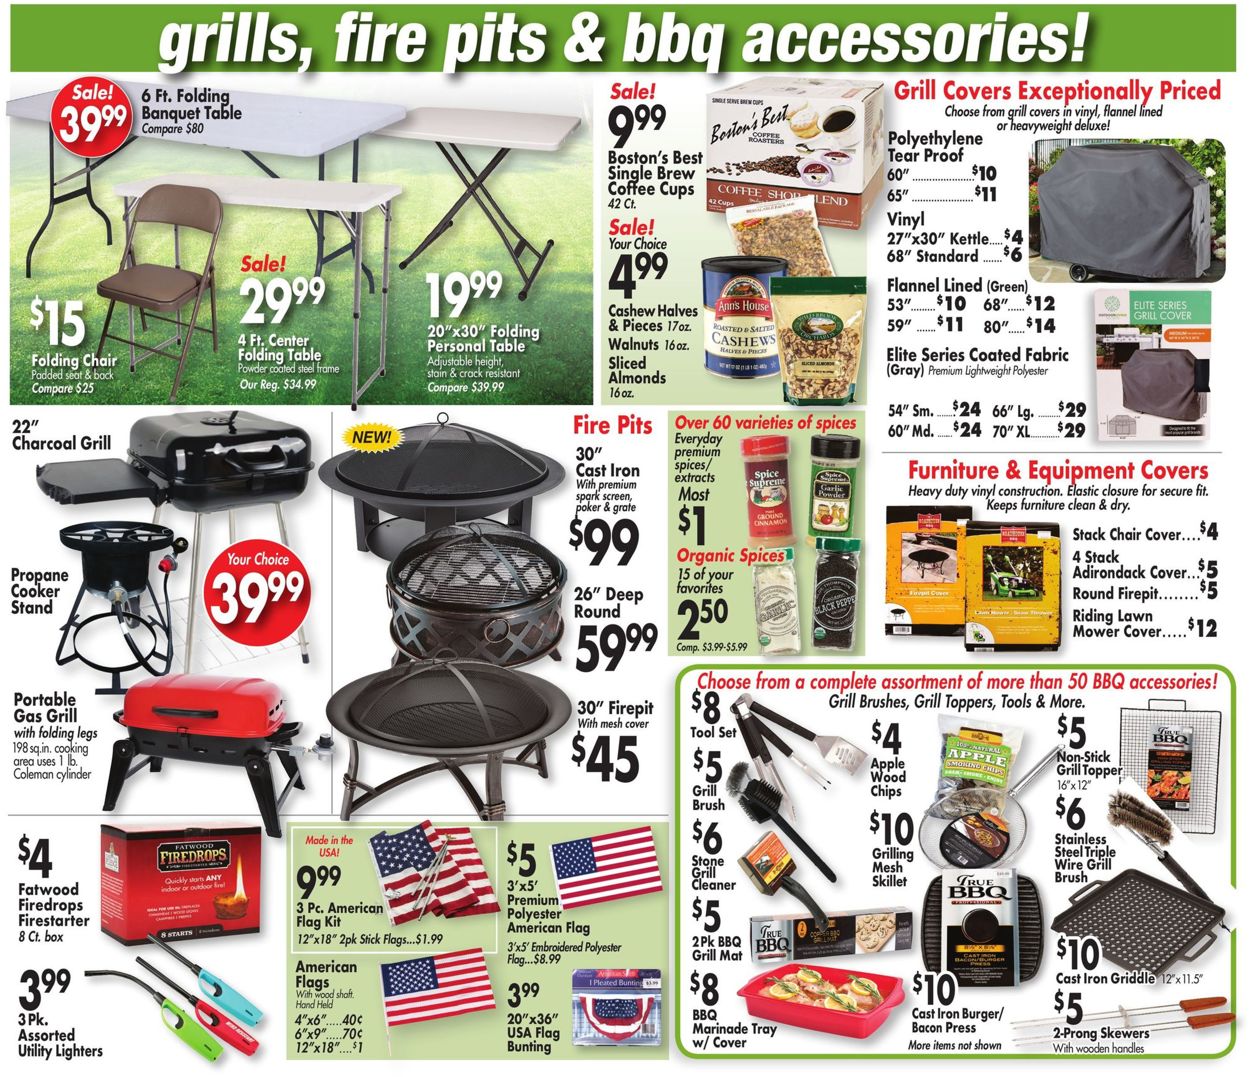 Ocean State Job Lot Current weekly ad 06/27 - 07/03/2019 [6] - frequent Ocean State Job Lot Grill Covers